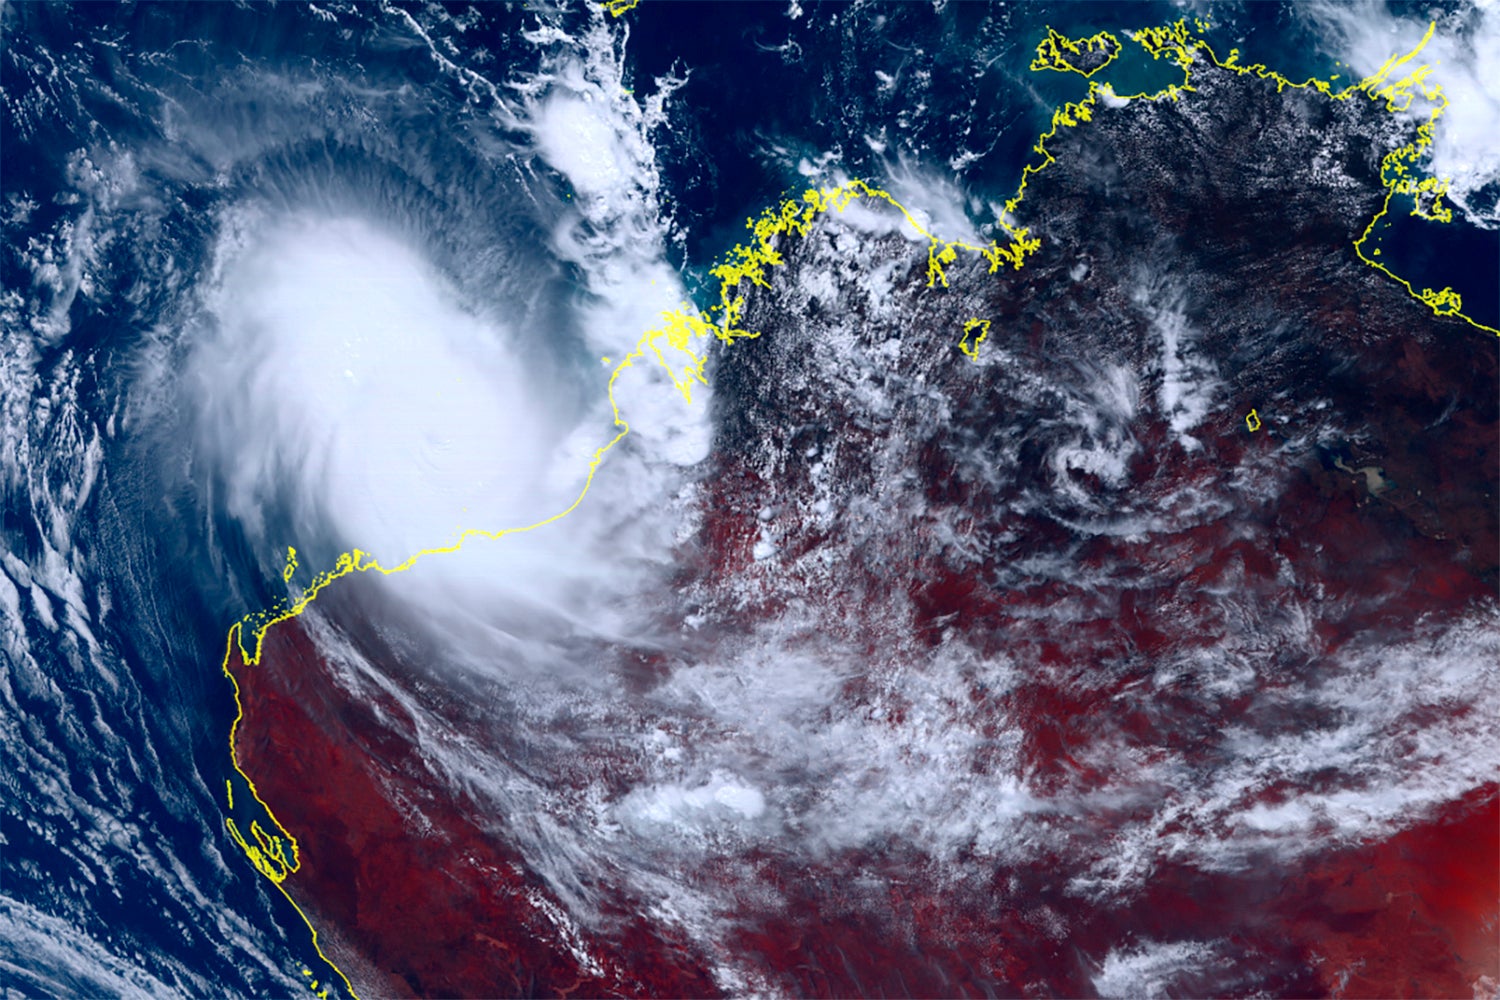 This satellite image taken by Himawari-8, a Japanese weather satellite, and provided by National Institute of Information and Communications Technology, shows cyclone Ilsa approaching Australia's west coast